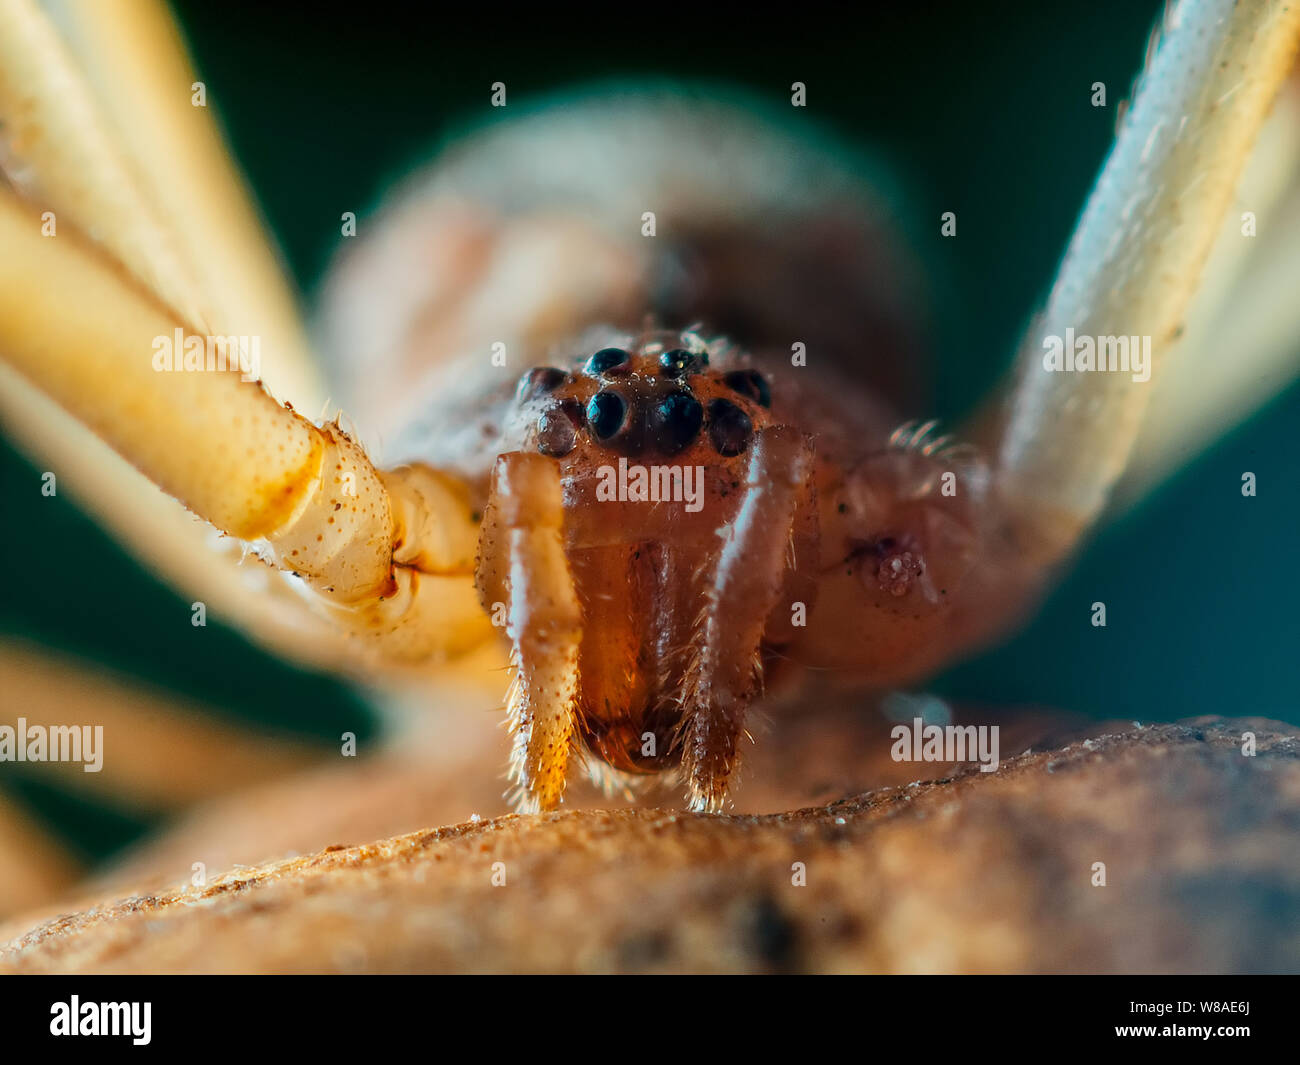 Brown widow spider (Latrodectus geometricus) frontal close-up with the spider eyes visible Stock Photo